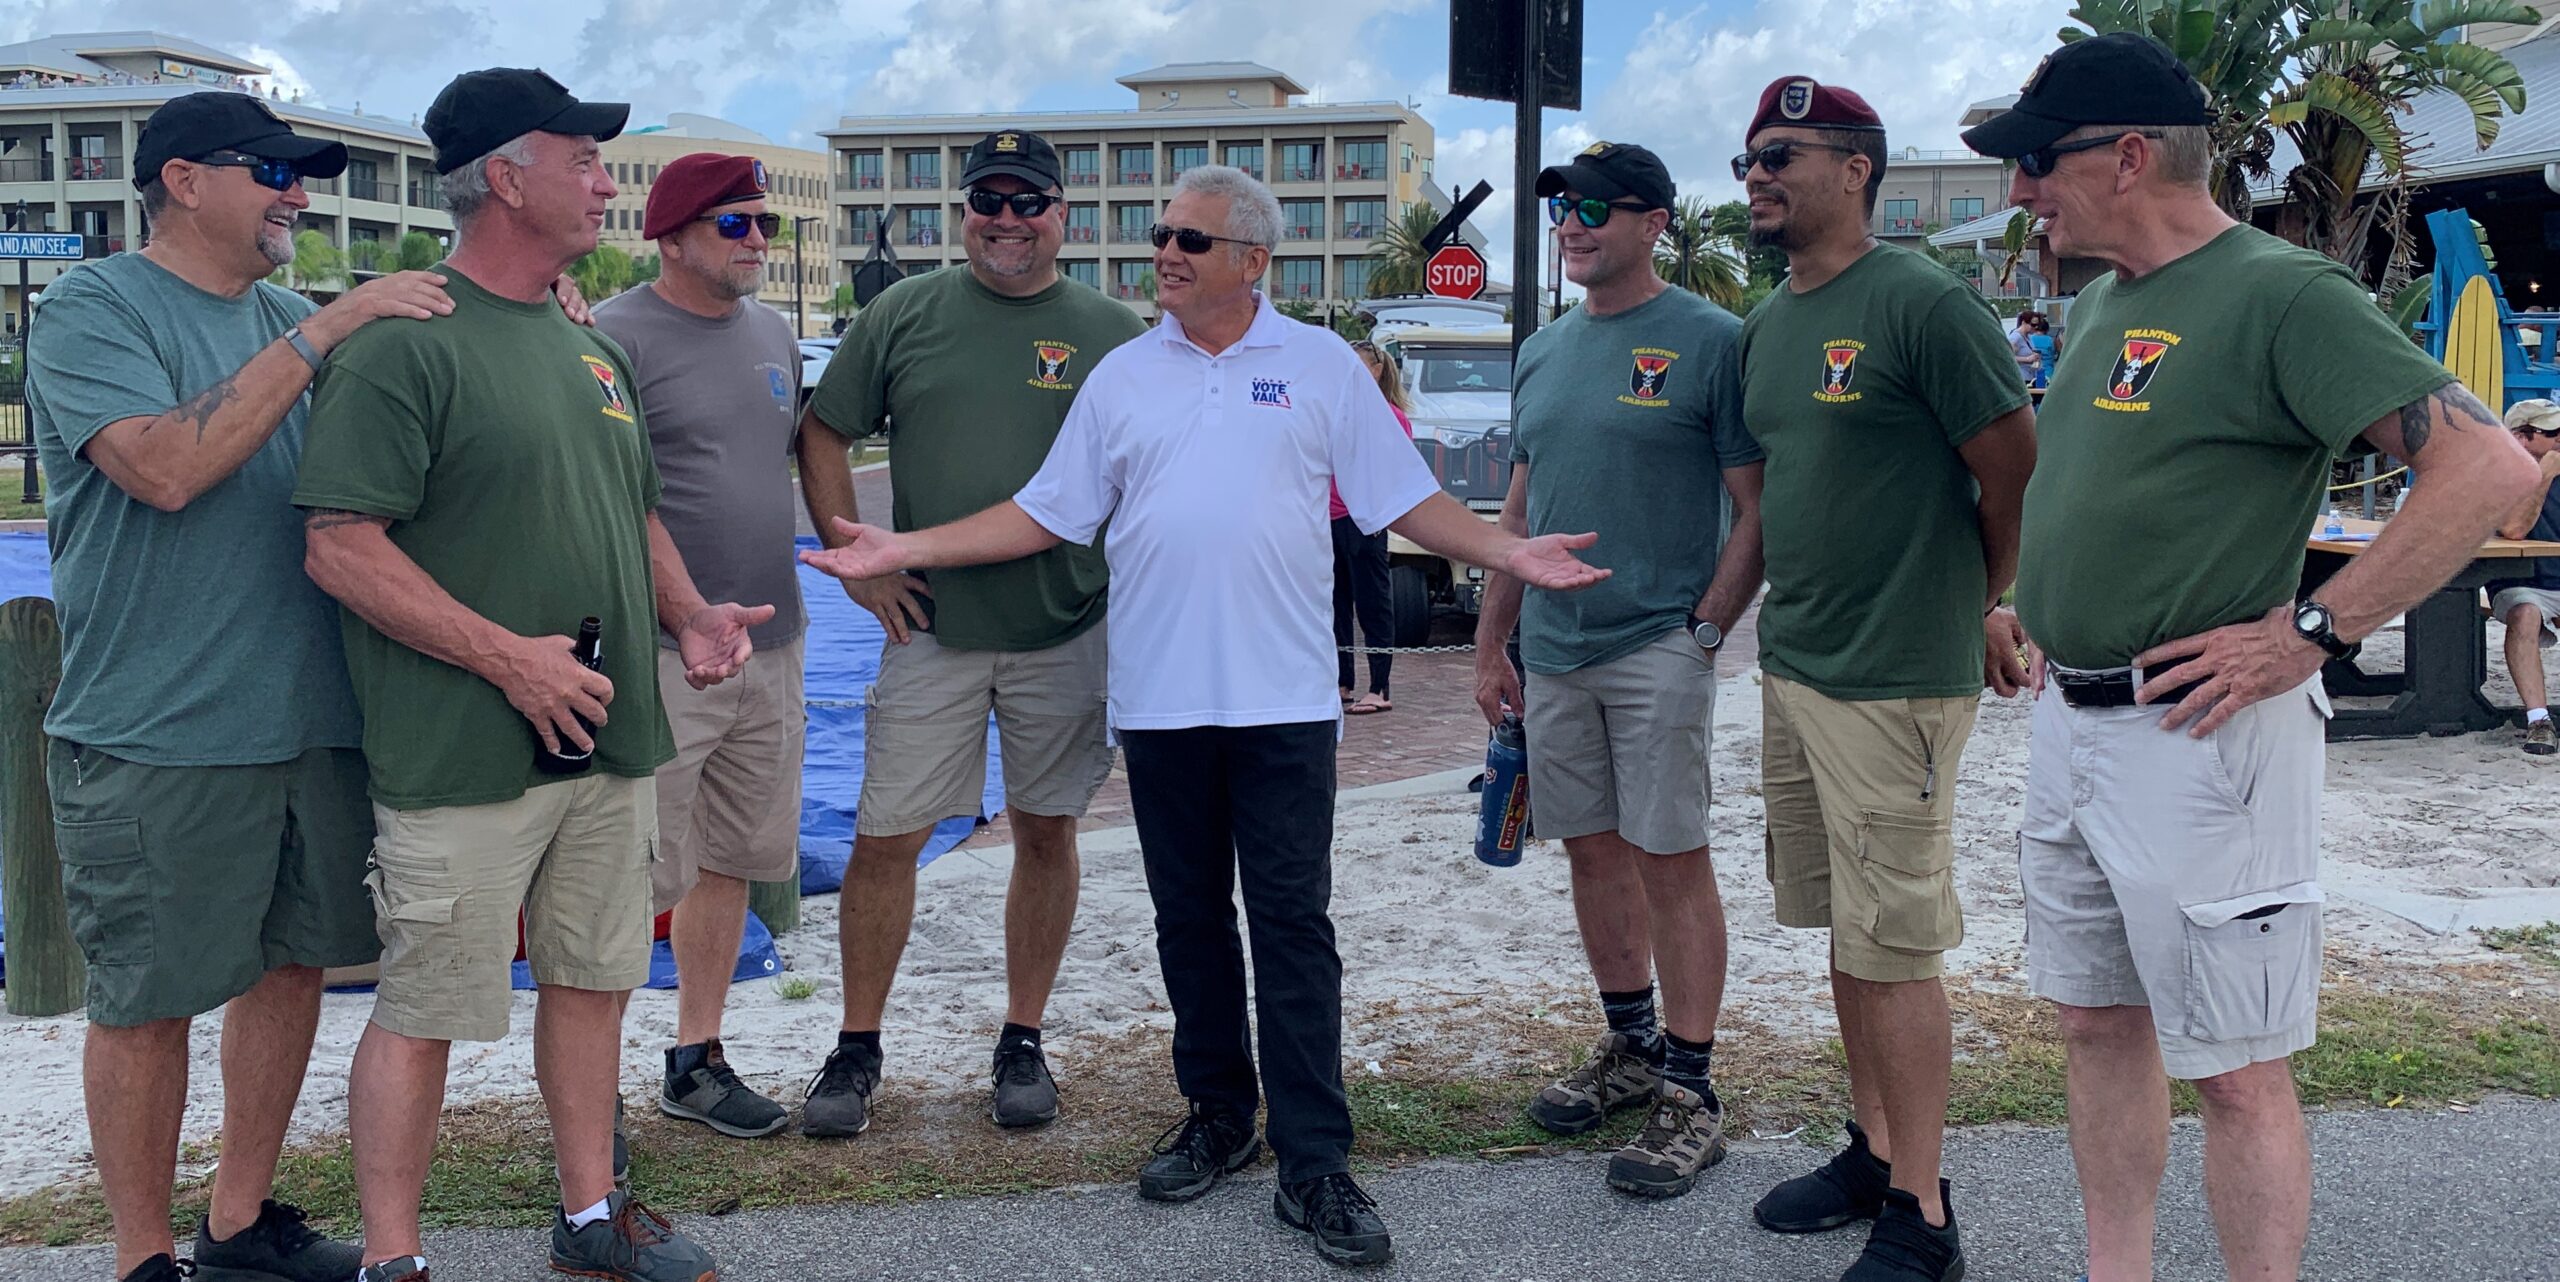 Tom Vail with paratroopers in Tavares, May 2022